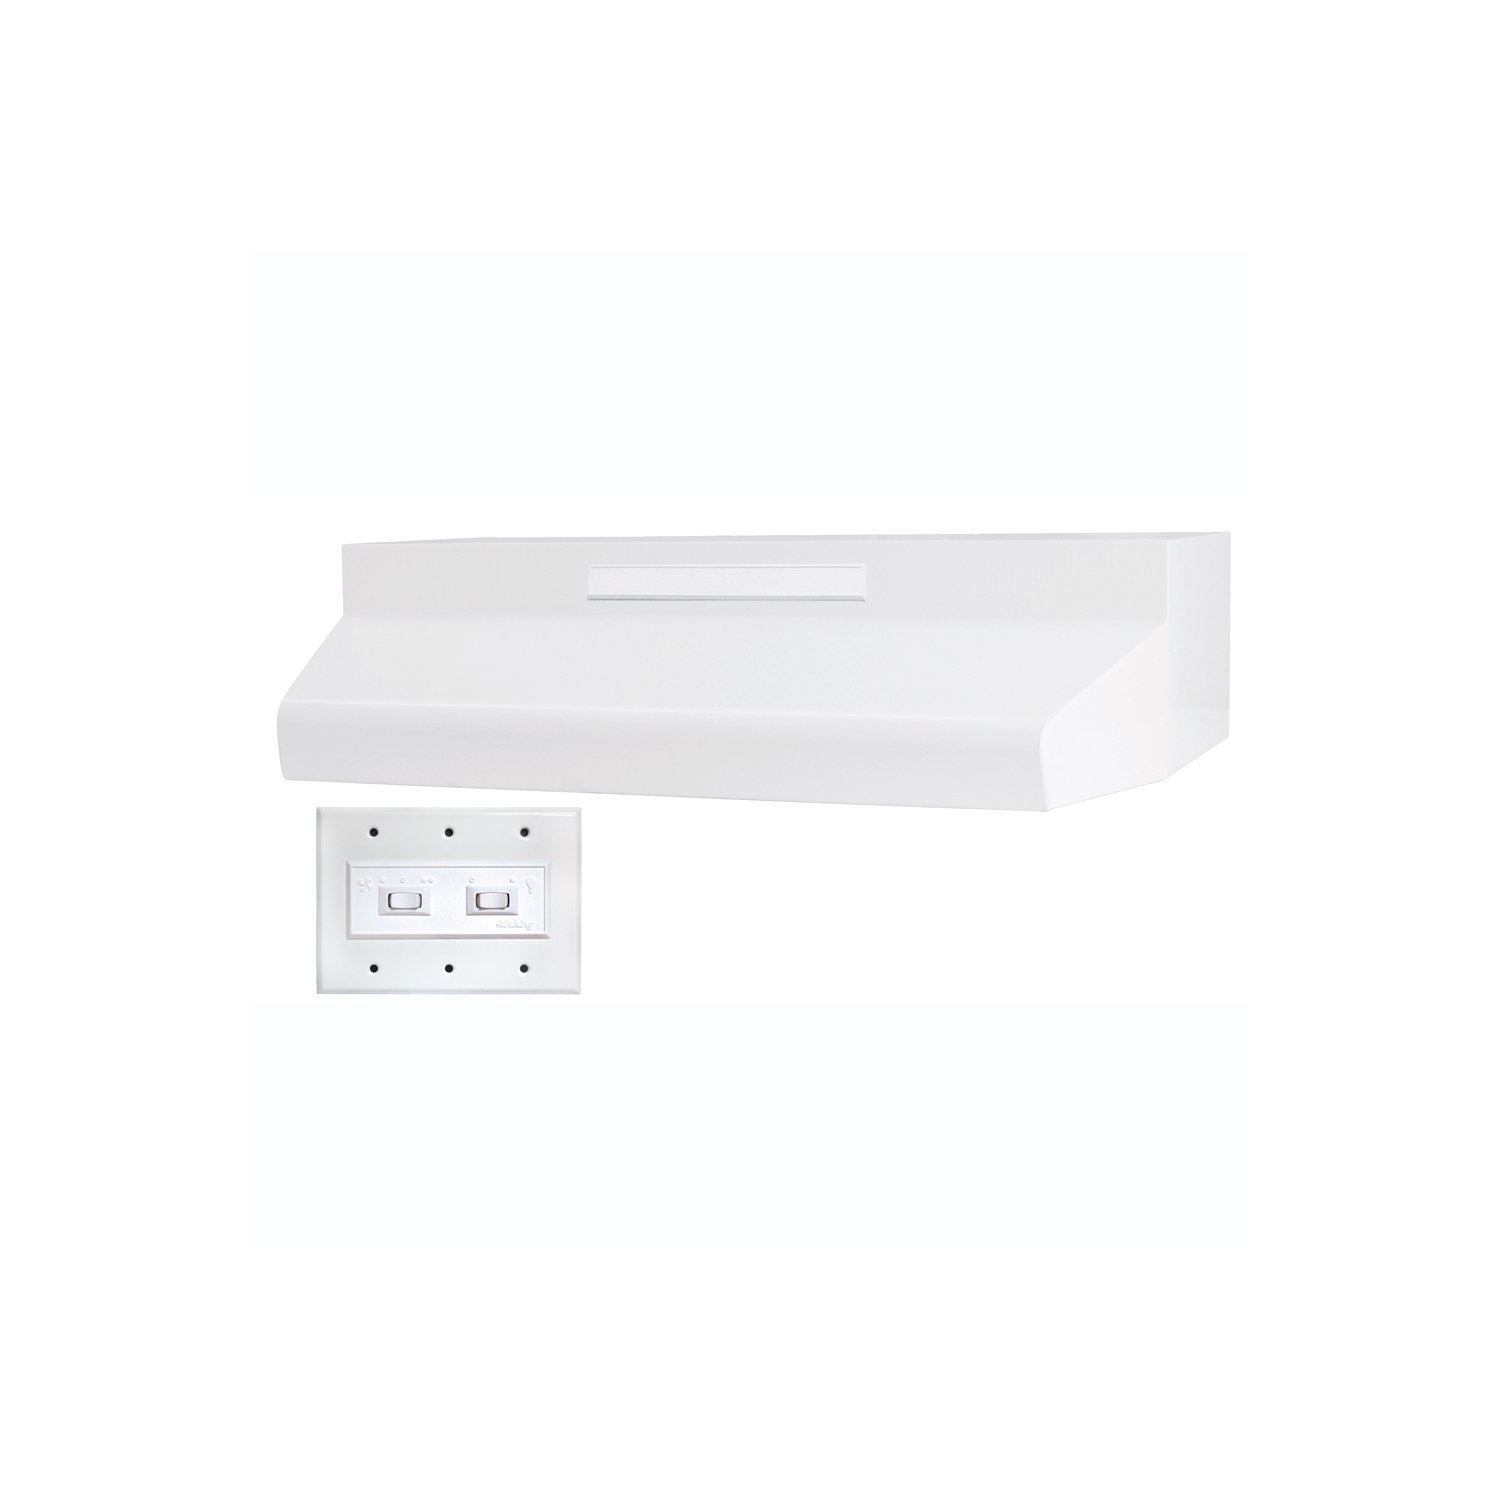 Air King Es243Ada Ada-Compliant Energy Star Qualified 24-Inch Wide Under Cabinet Range Hood With 2-Speed Blower And 270 Cfm, Whi